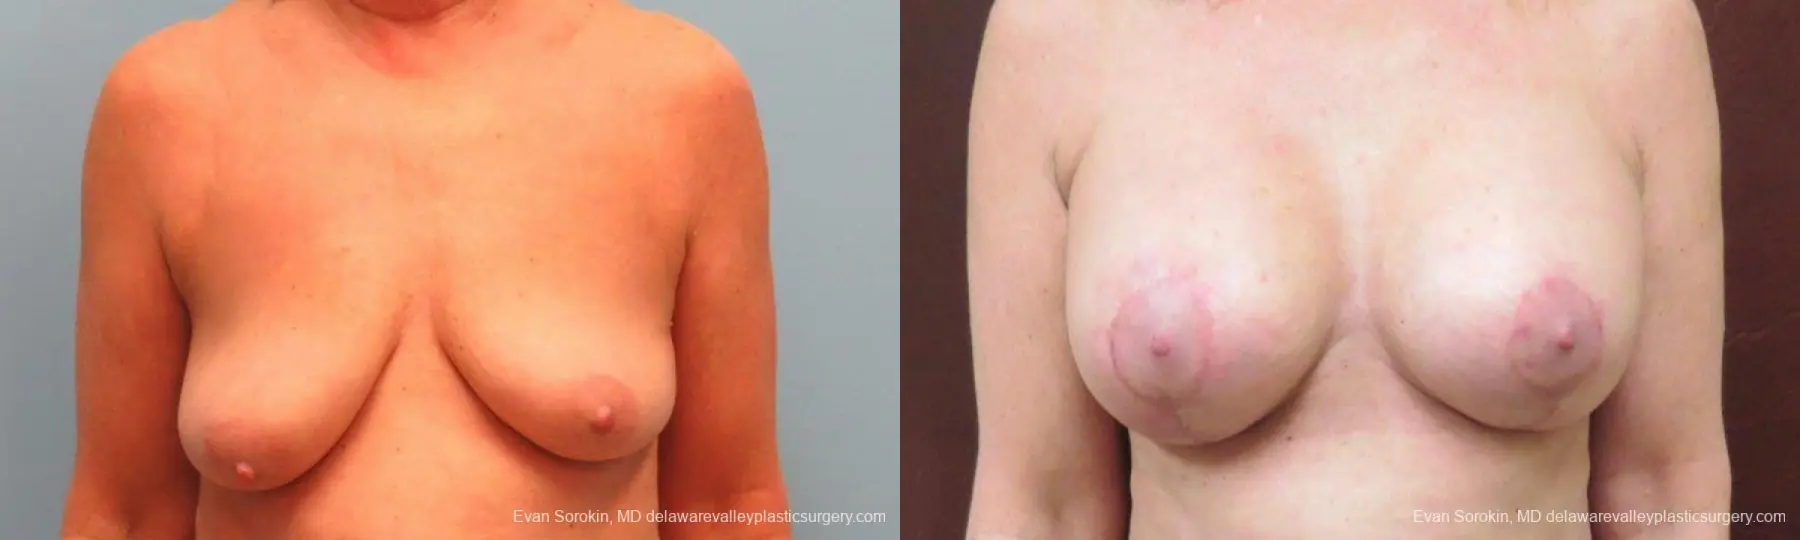 Philadelphia Breast Lift and Augmentation 9598 - Before and After 1